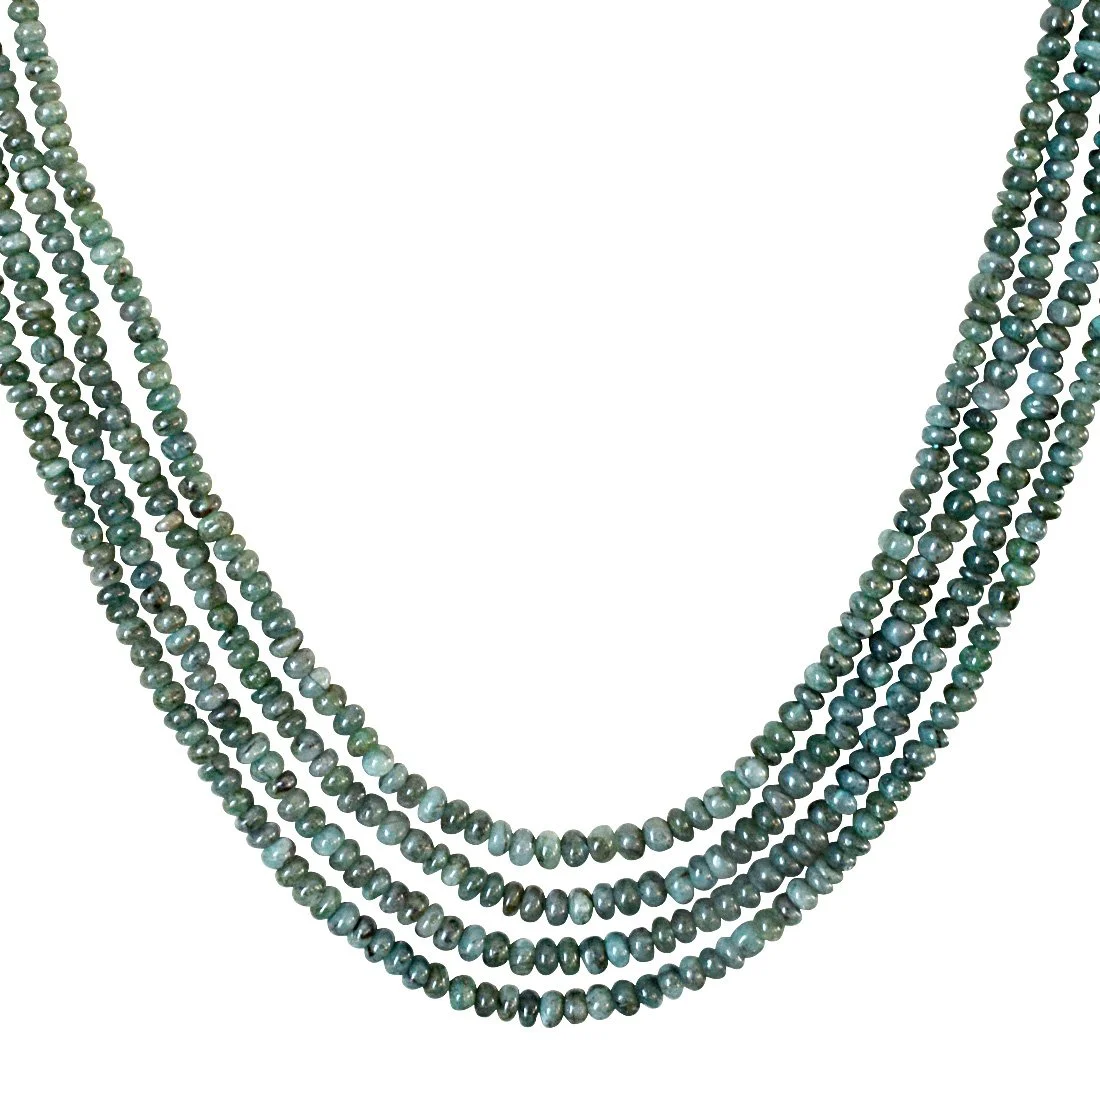 4 Line 178cts REAL Natural Green Emerald Beads Necklace for Women (178cts EMR Neck)